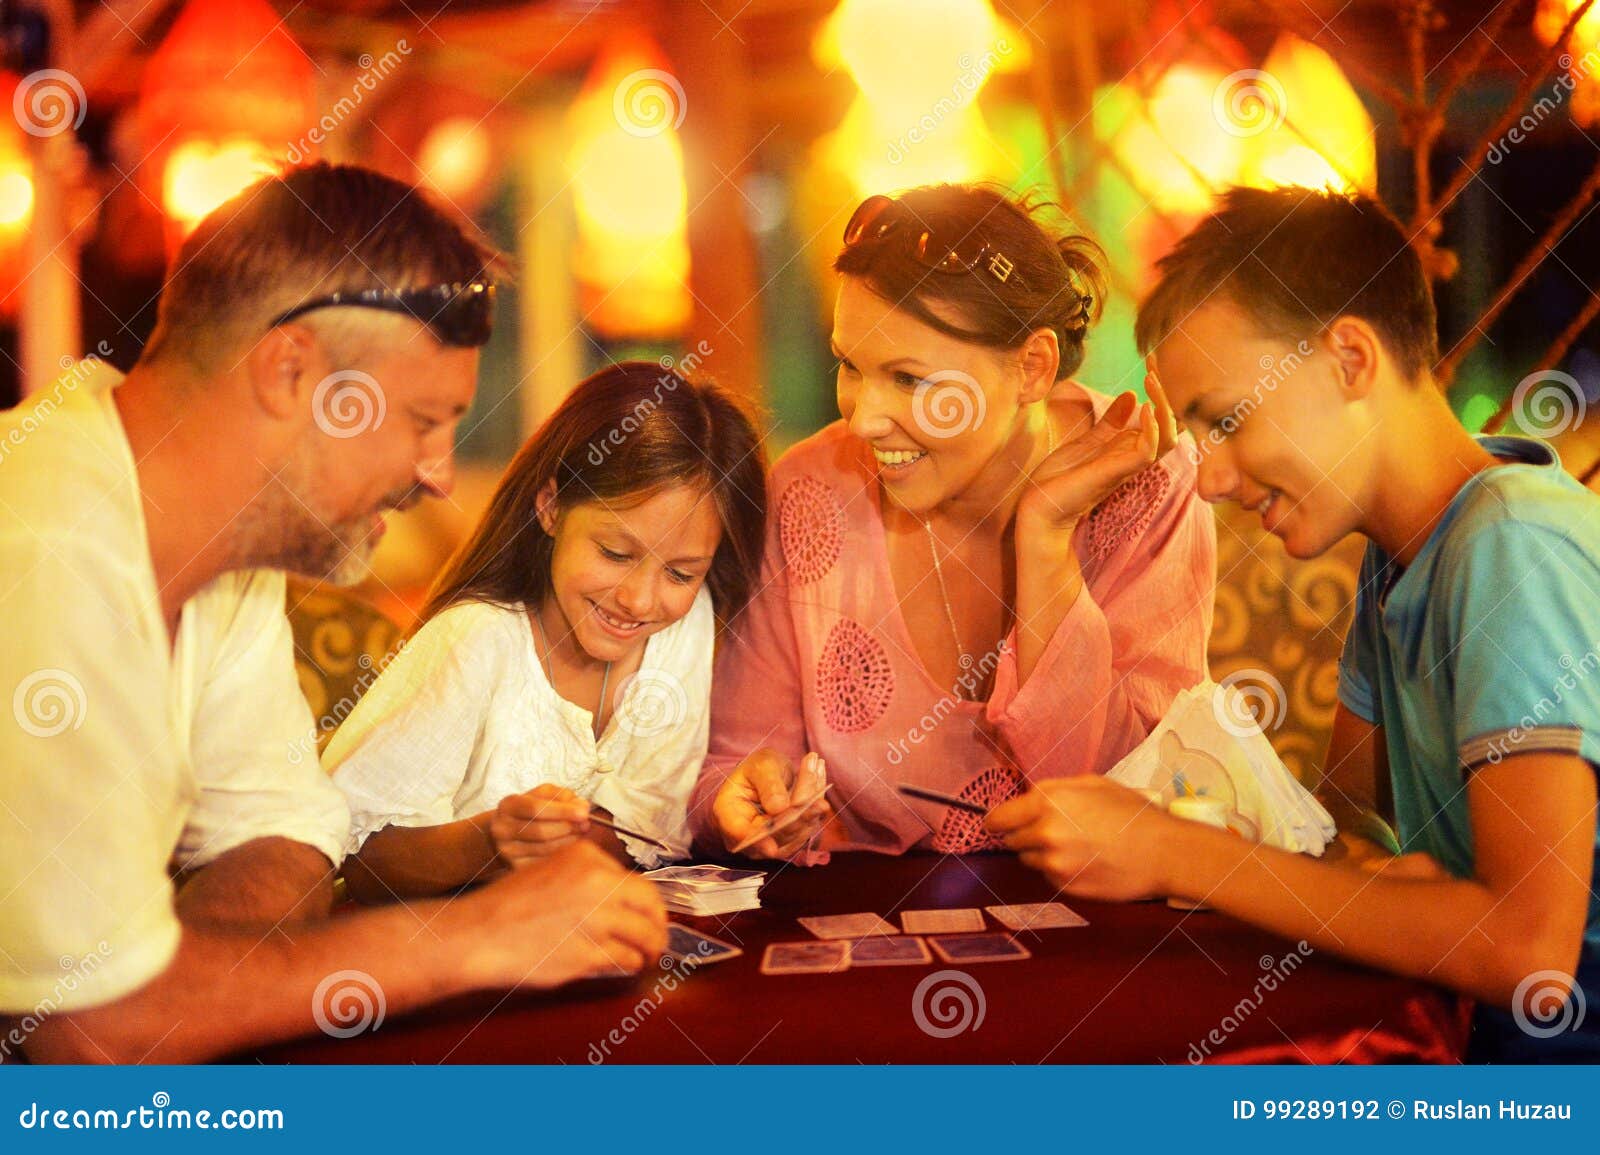 happy family playing cards